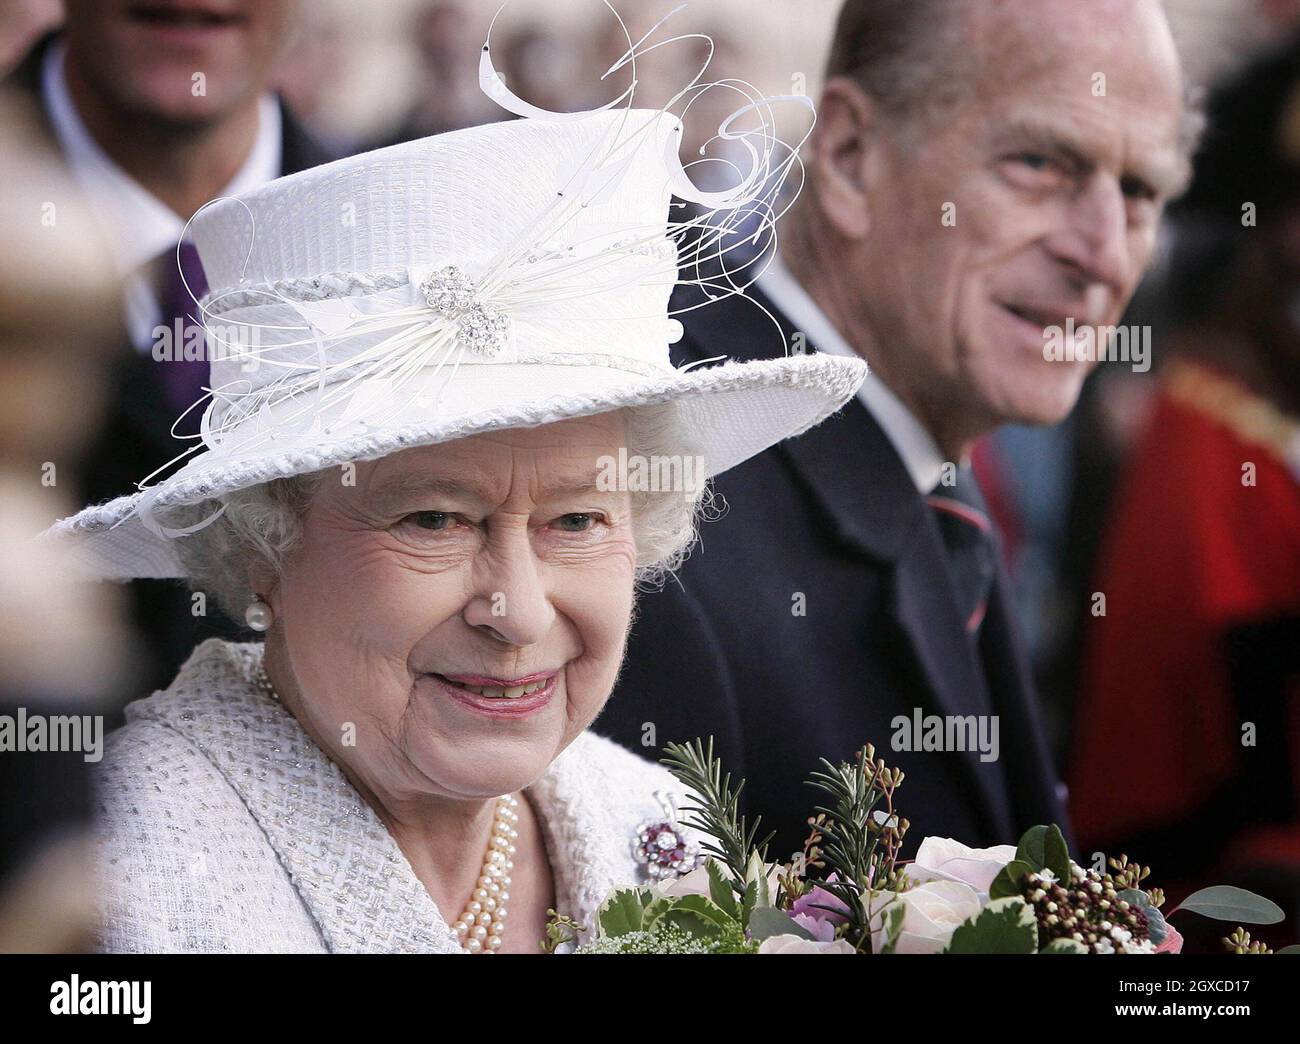 Queen Elizabeth ll and Prince Philip, Duke of Edinburgh attend the unveiling of the Jubilee Walkway panel on Parliament Square following a service of celebration for their diamond wedding anniversary at Westminster Abbey in London. Stock Photo